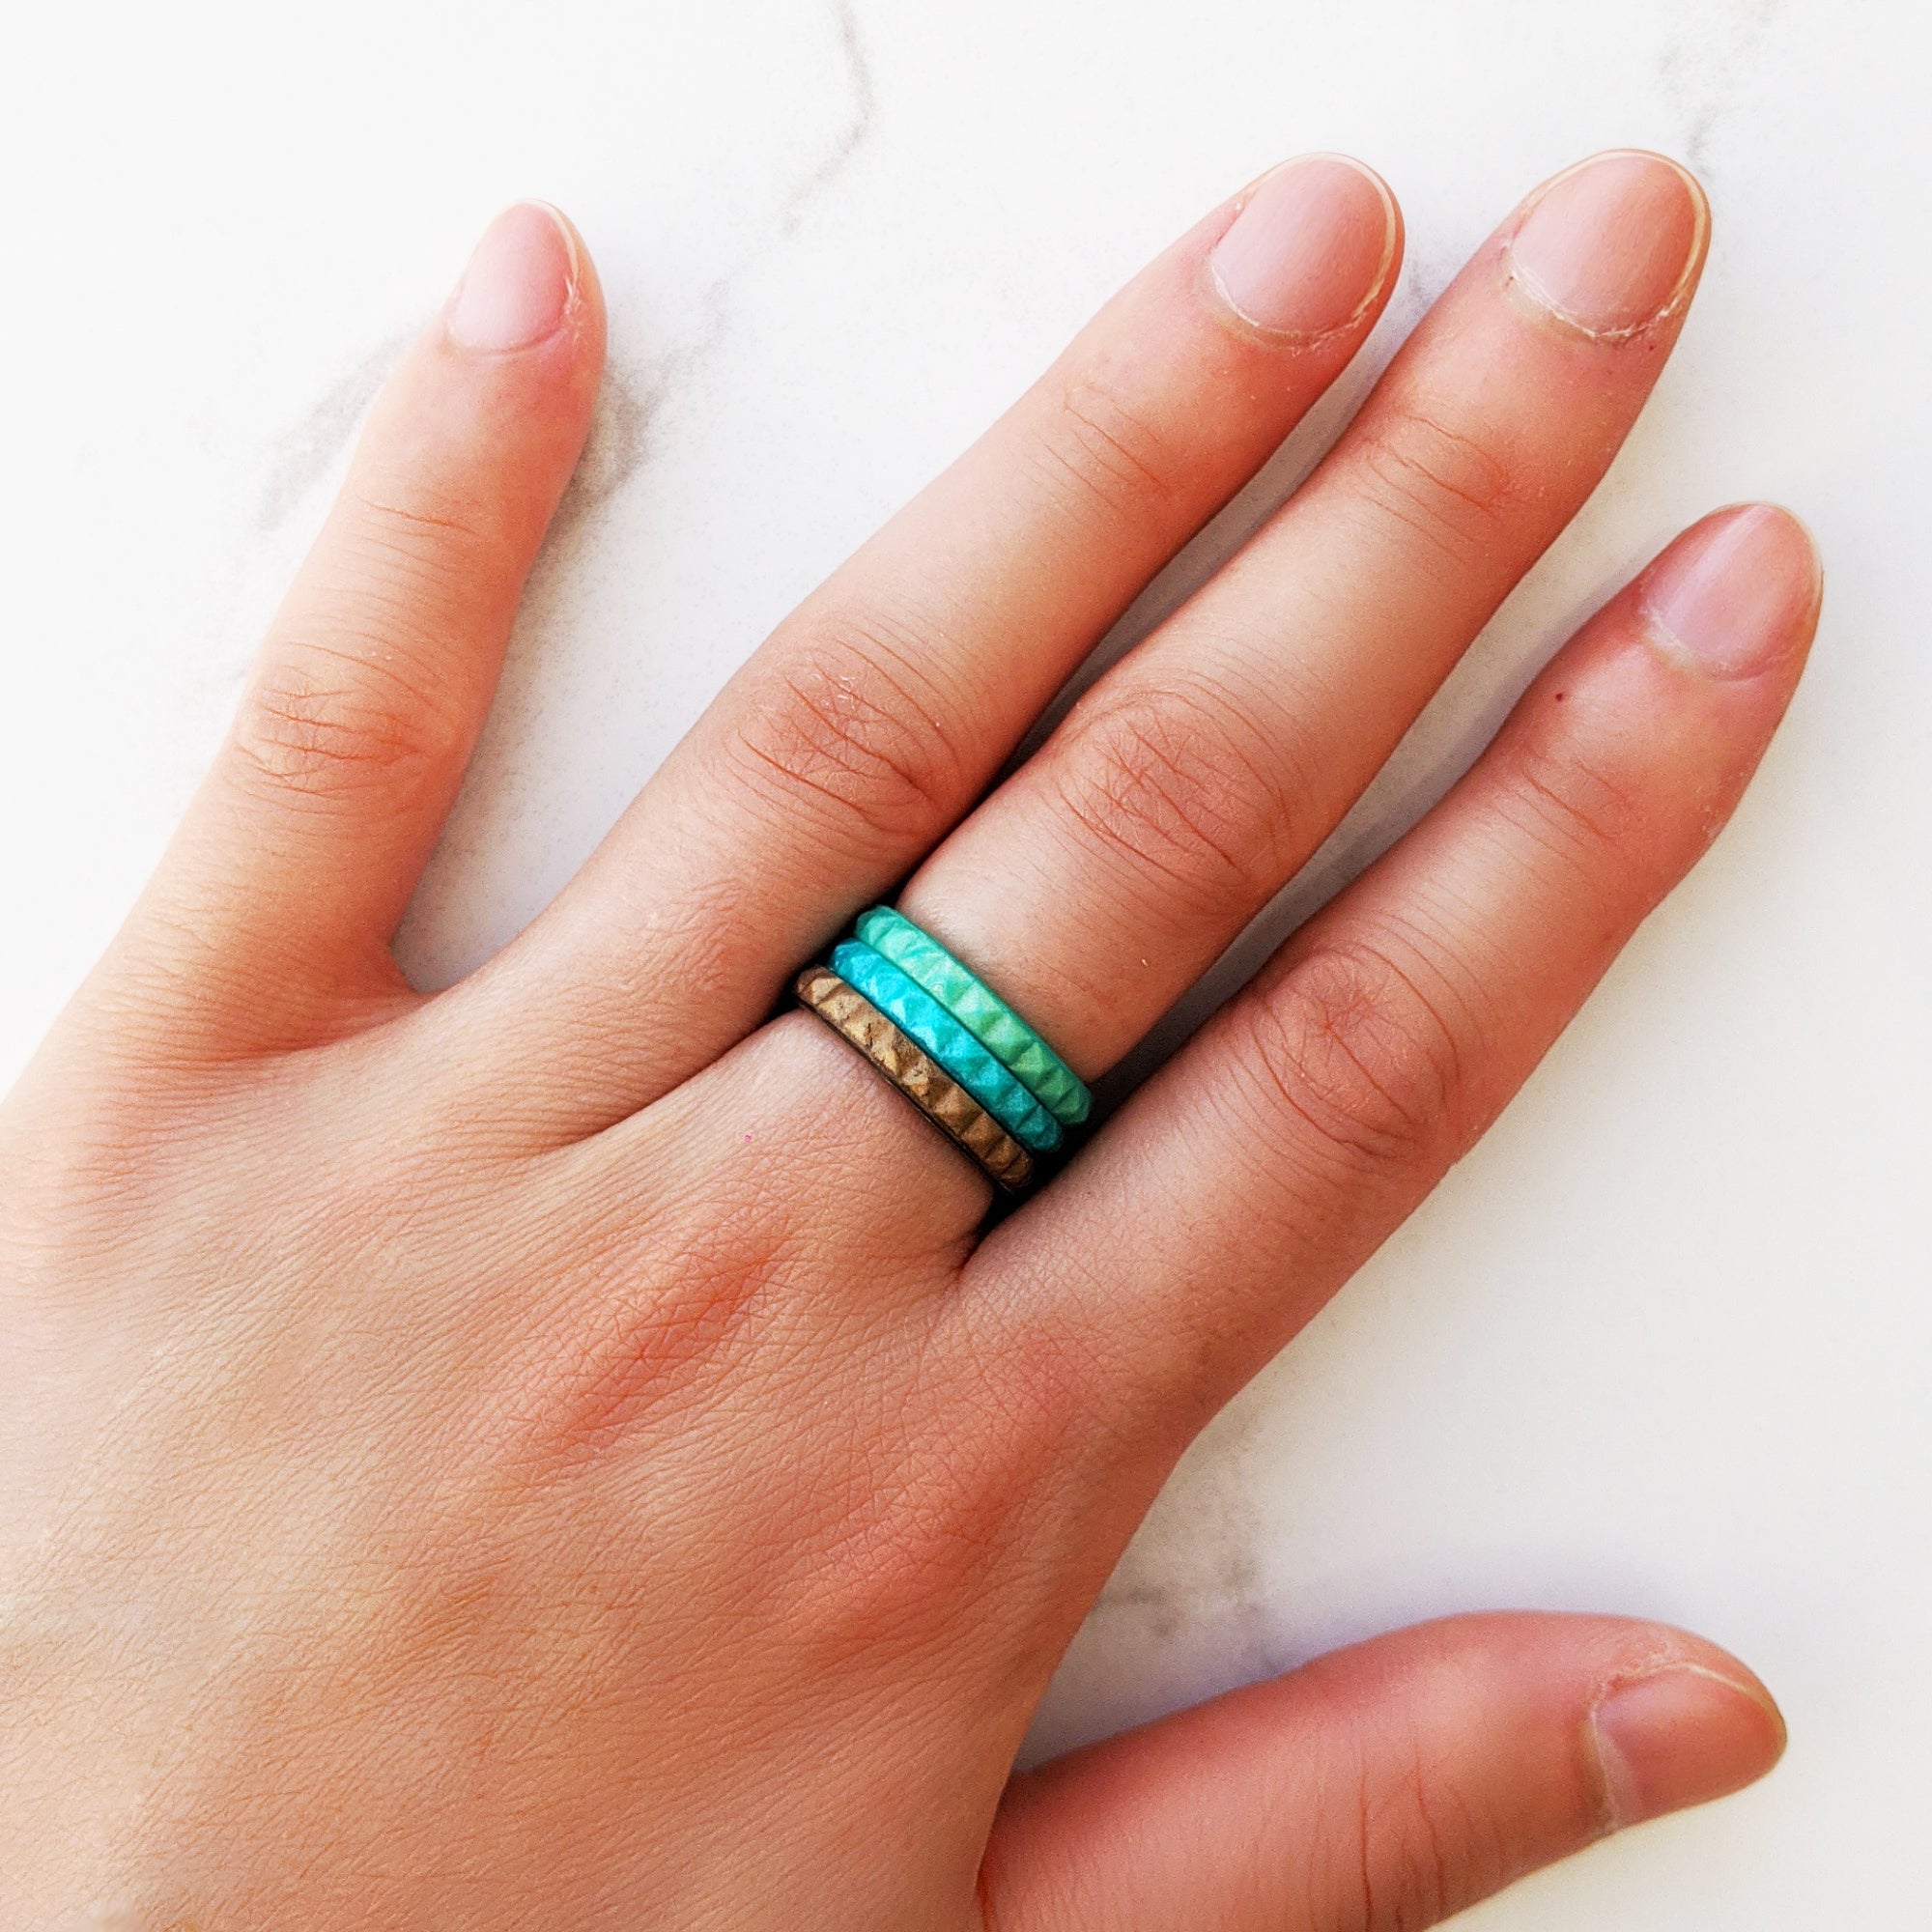 Enchanted Green Pyramid Stackable Slim Thin Silicone Ring for Women